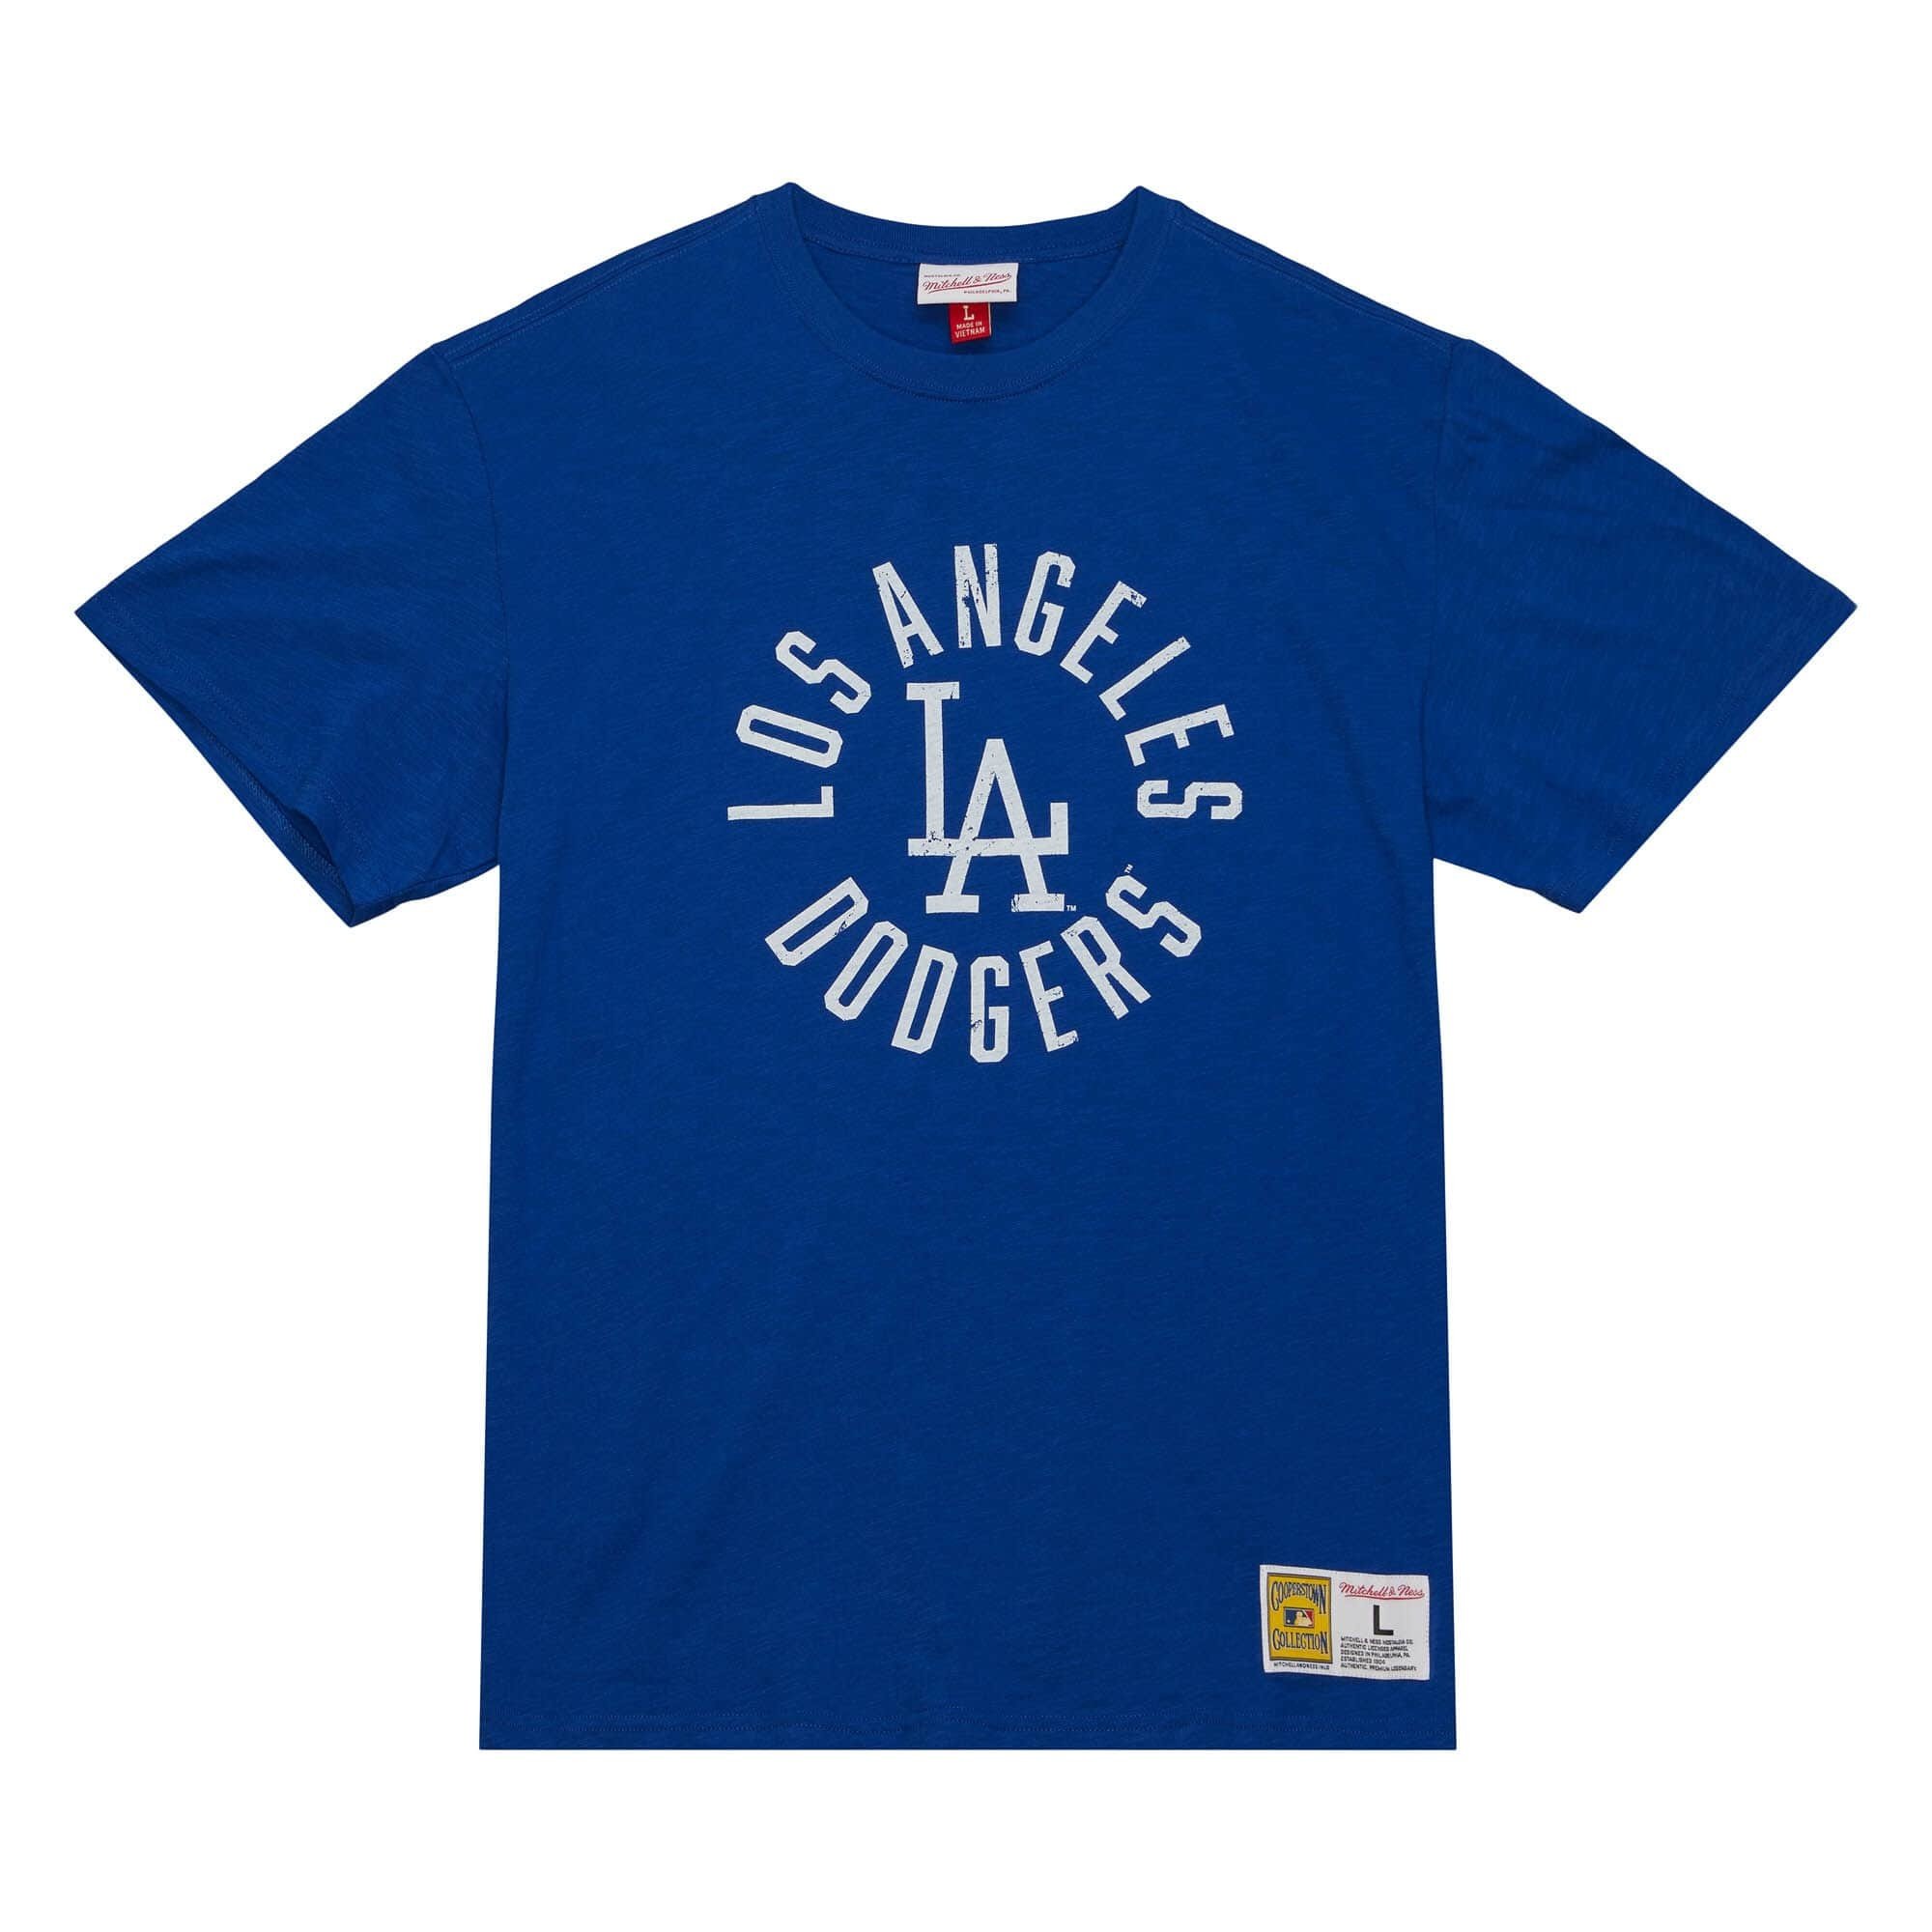  Mitchell & Ness MLB T-Shirt Cooperstown Collection